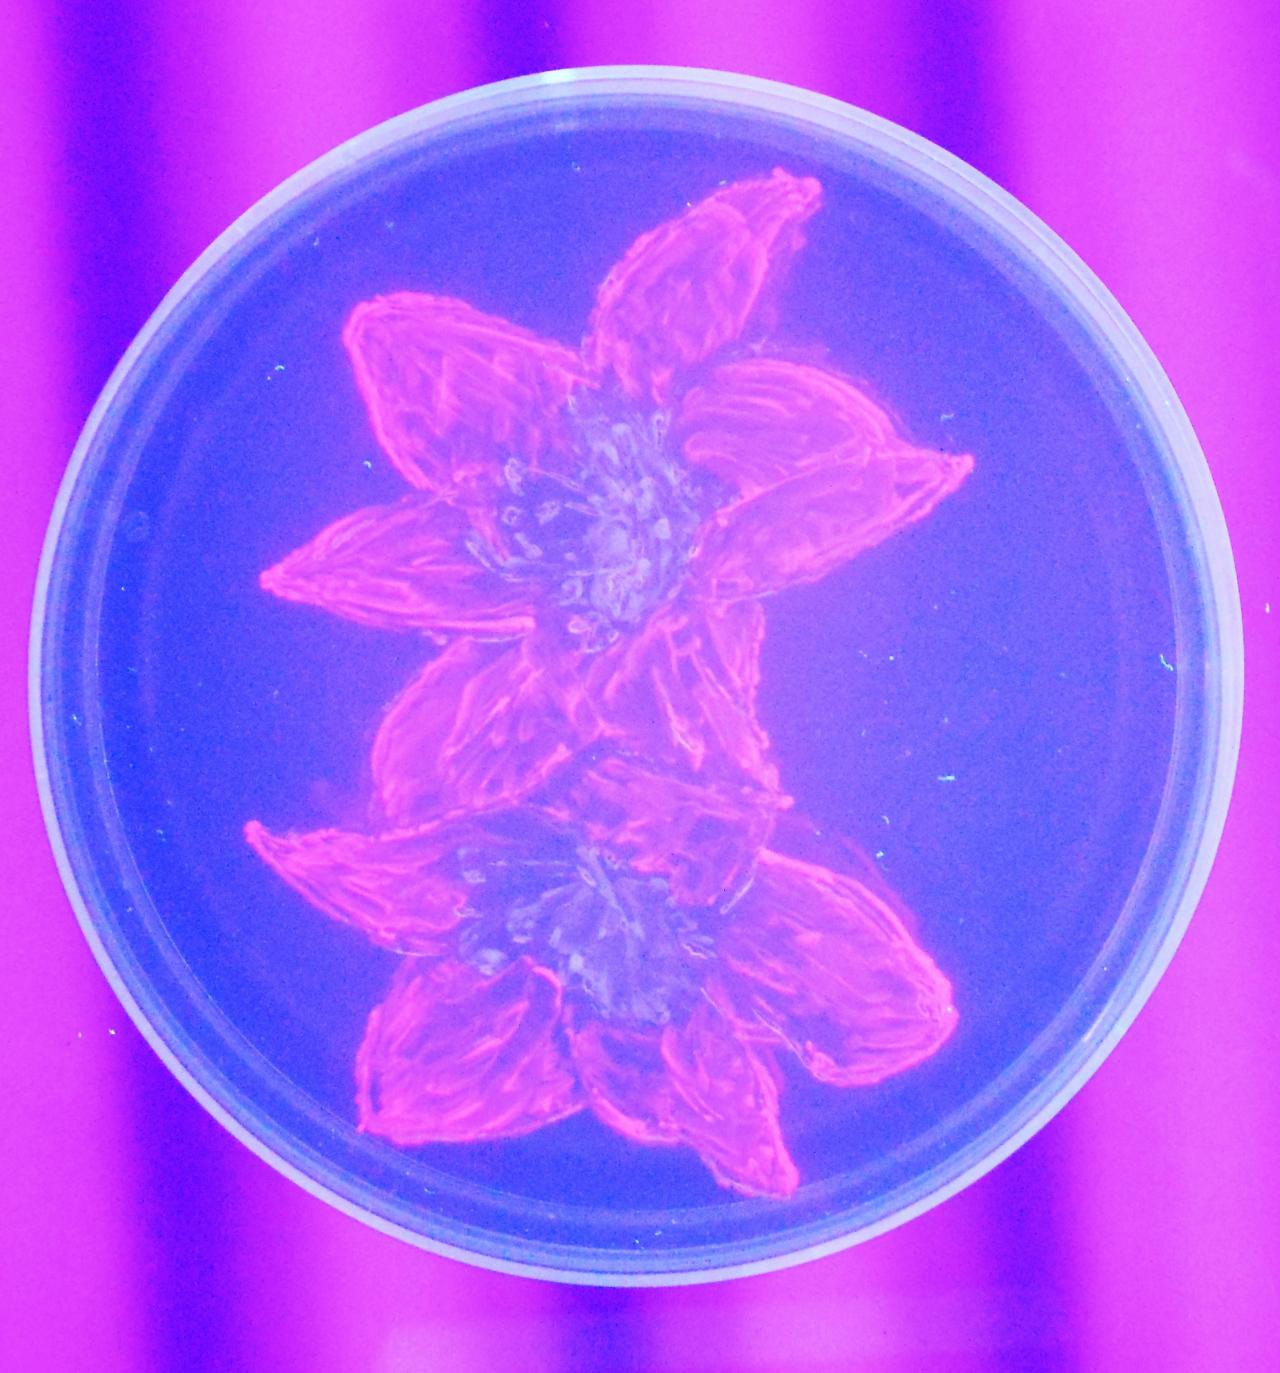 Beautiful bacteria: winners of the 2015 Agar Art Competition | See full galleryMicrobes and germs were used to paint masterpieces on a canvas of agar jelly in a competition run by the American Society for Microbiology. Scientists from around the...